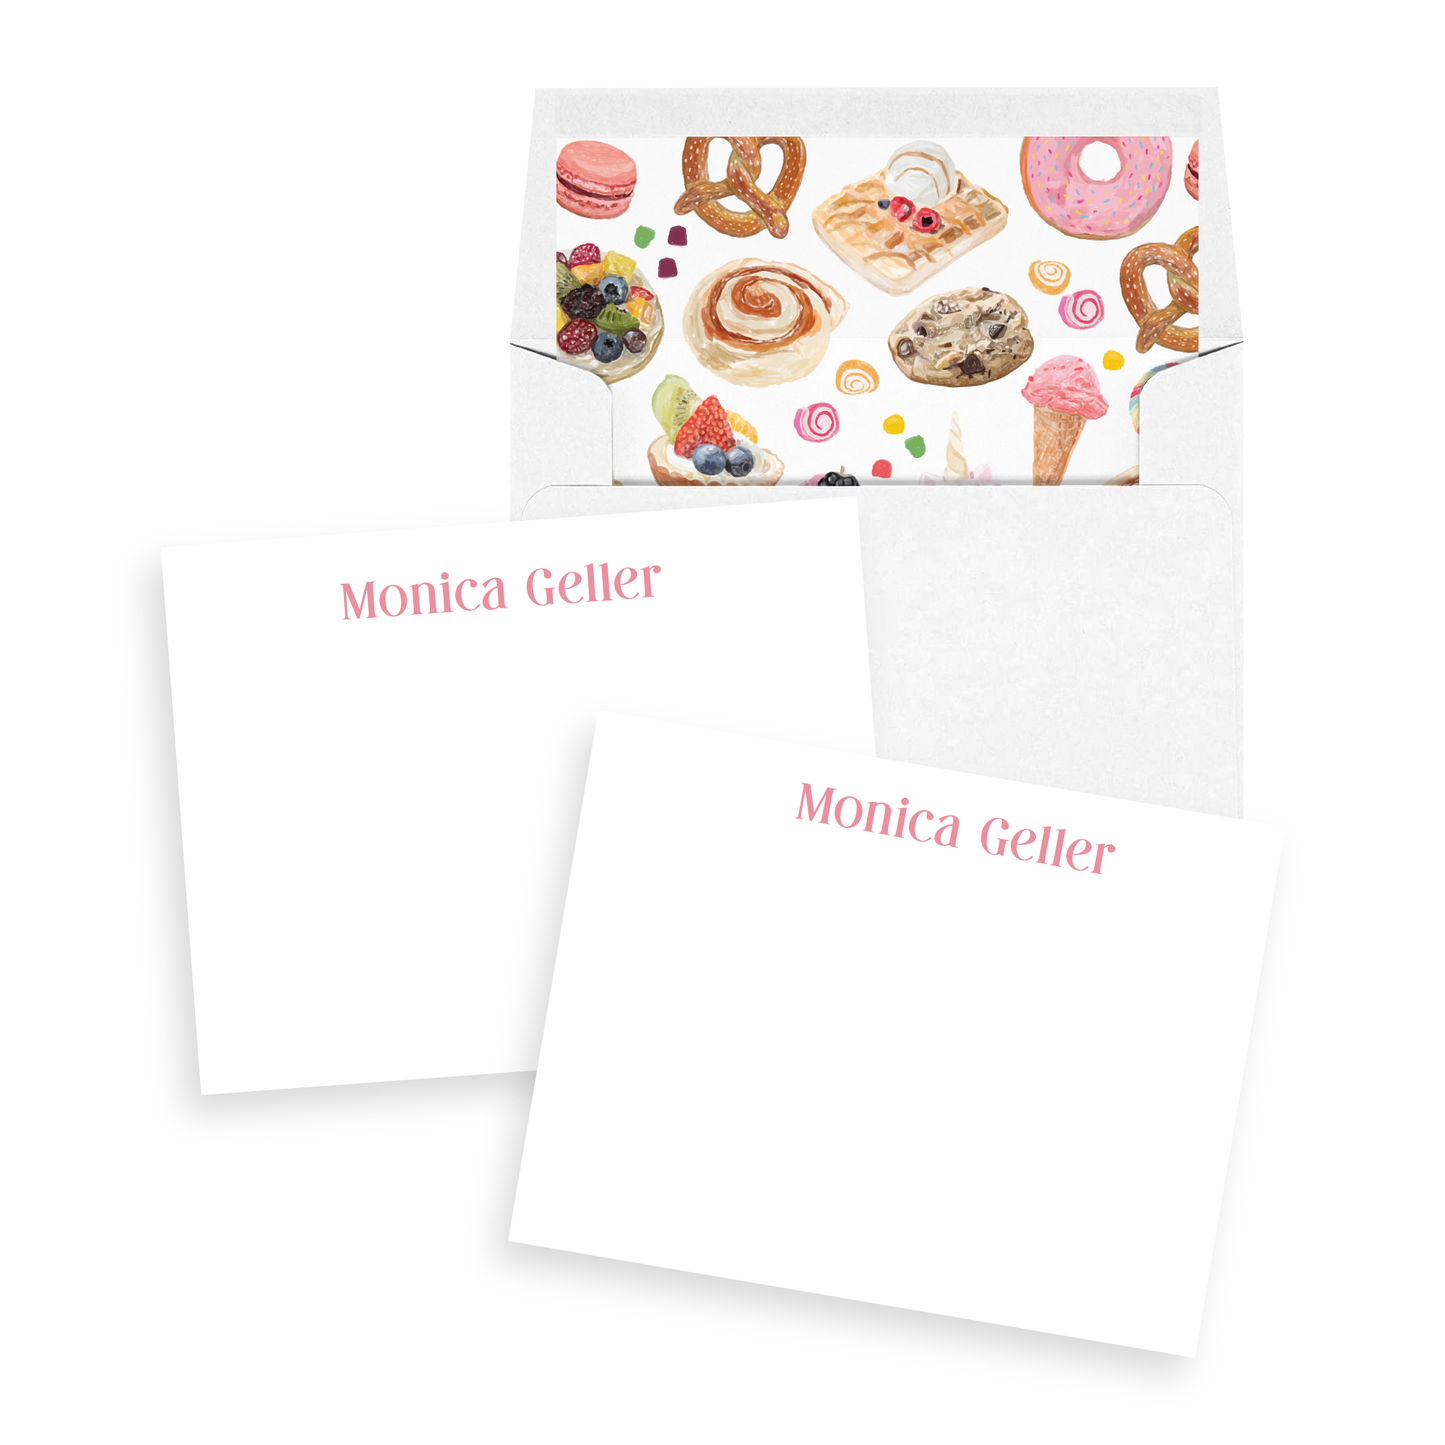 Baker's Personalized Stationery Set of 12